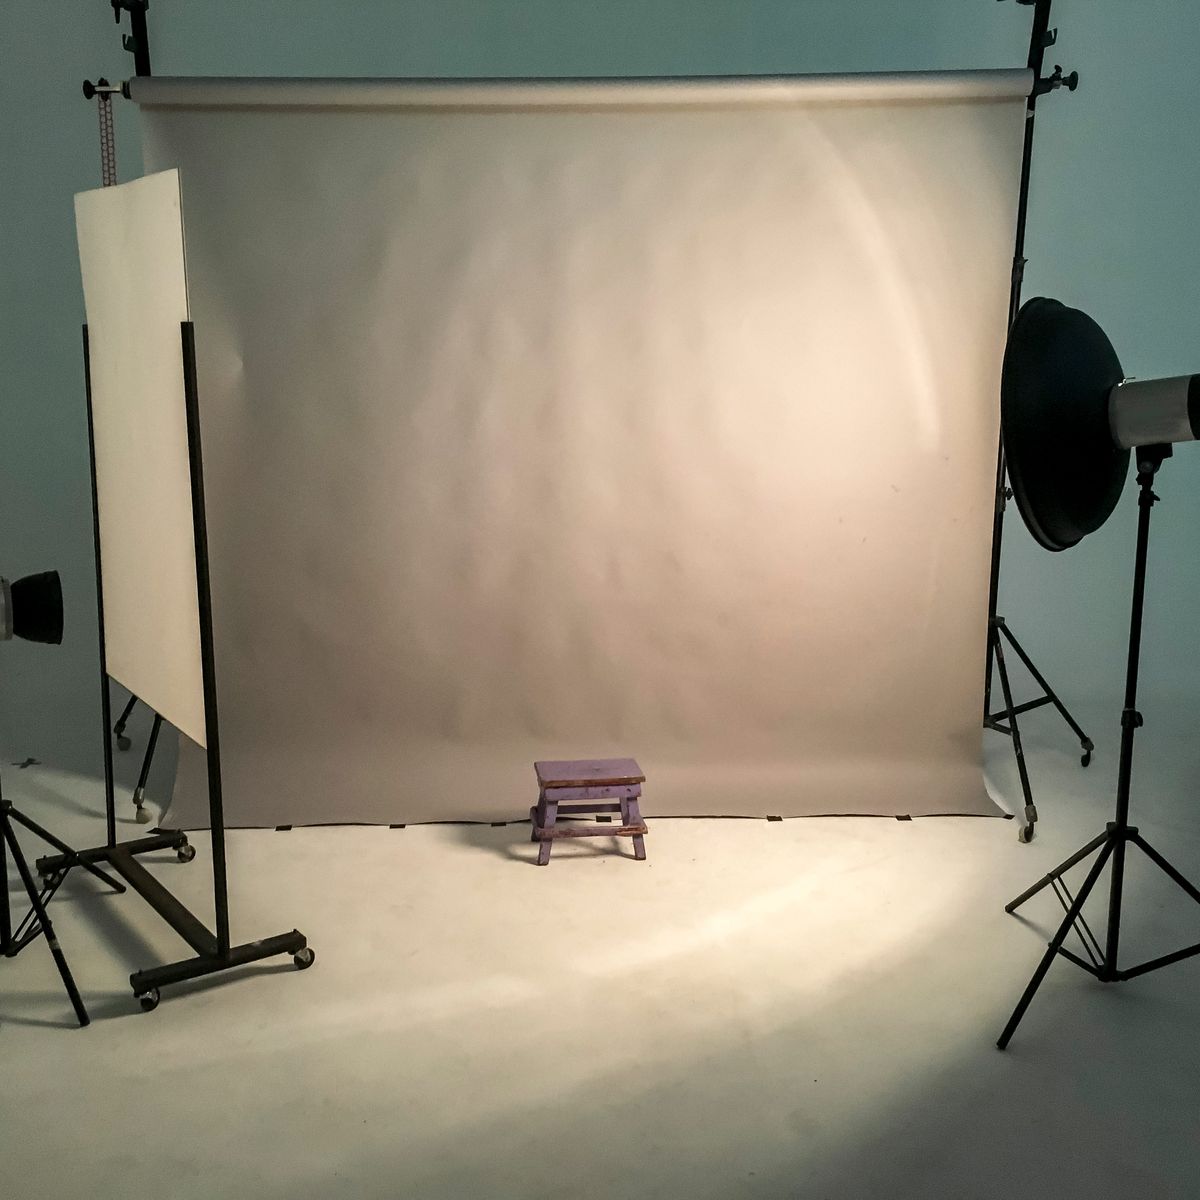 Conference Video Light Set with Adjustable Tripod Stand and Clip for